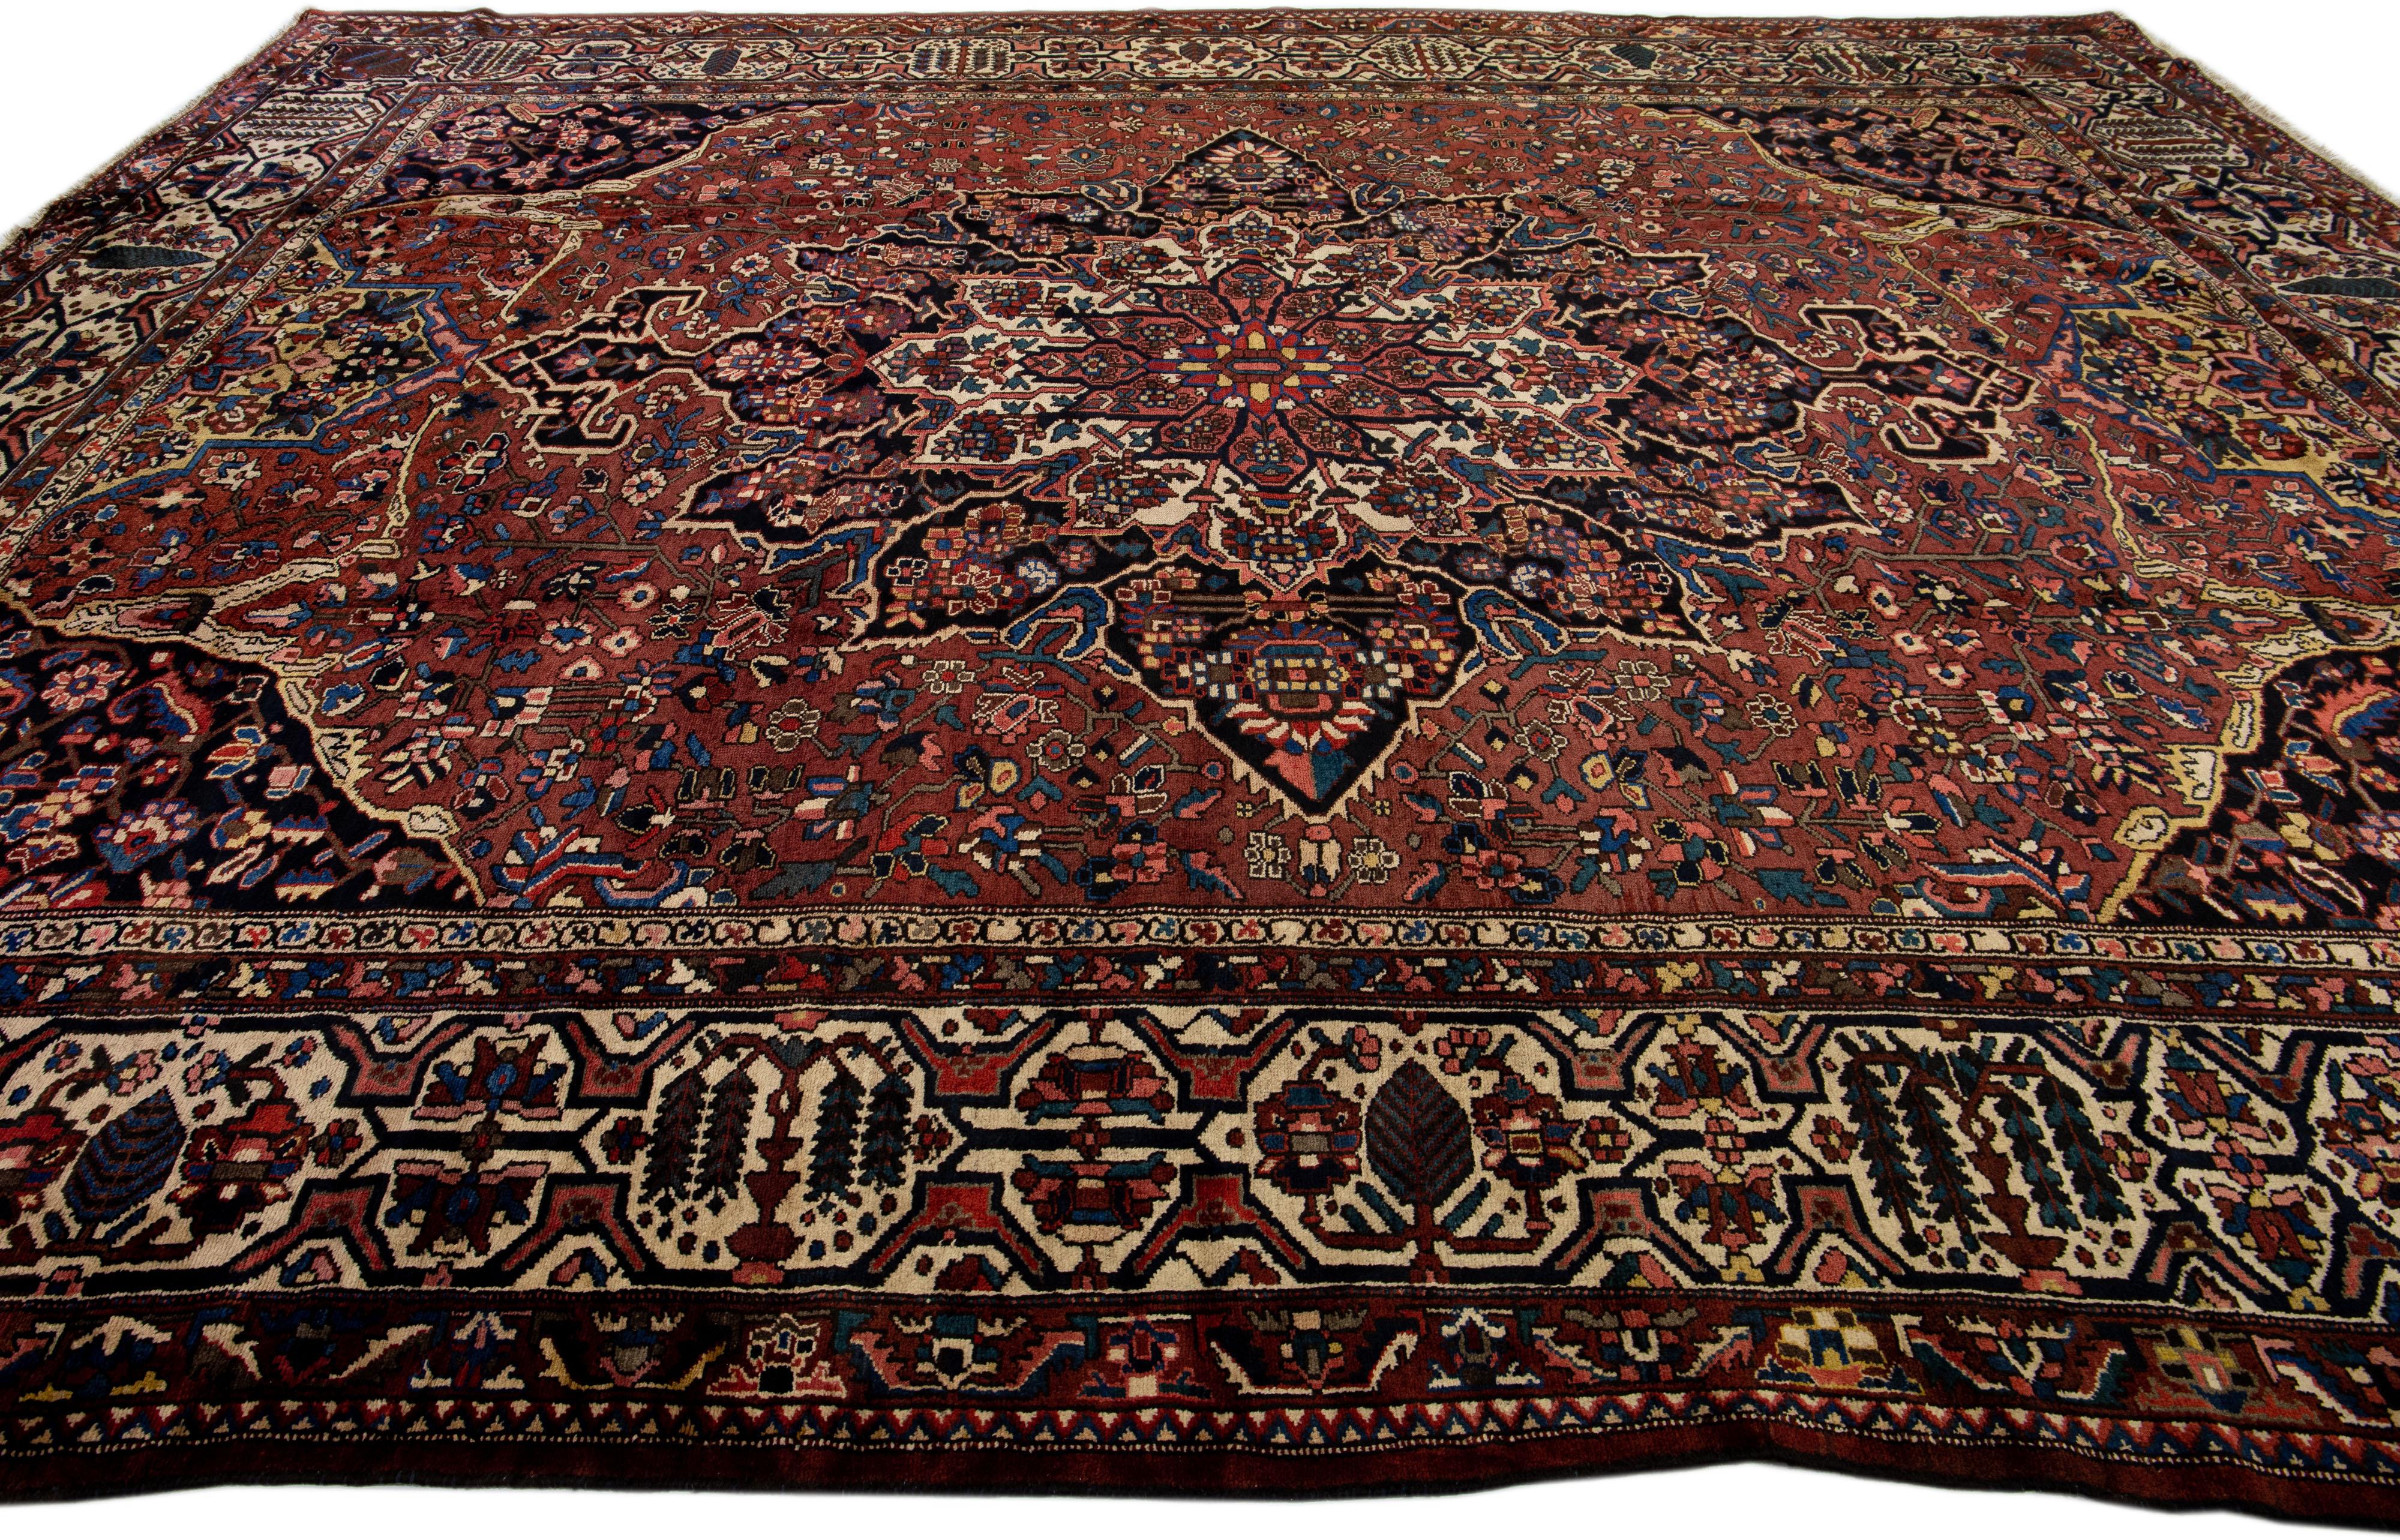 Handmade 20th Century Red Persian Bakhtiari Wool Rug With Allover Motif In Good Condition For Sale In Norwalk, CT